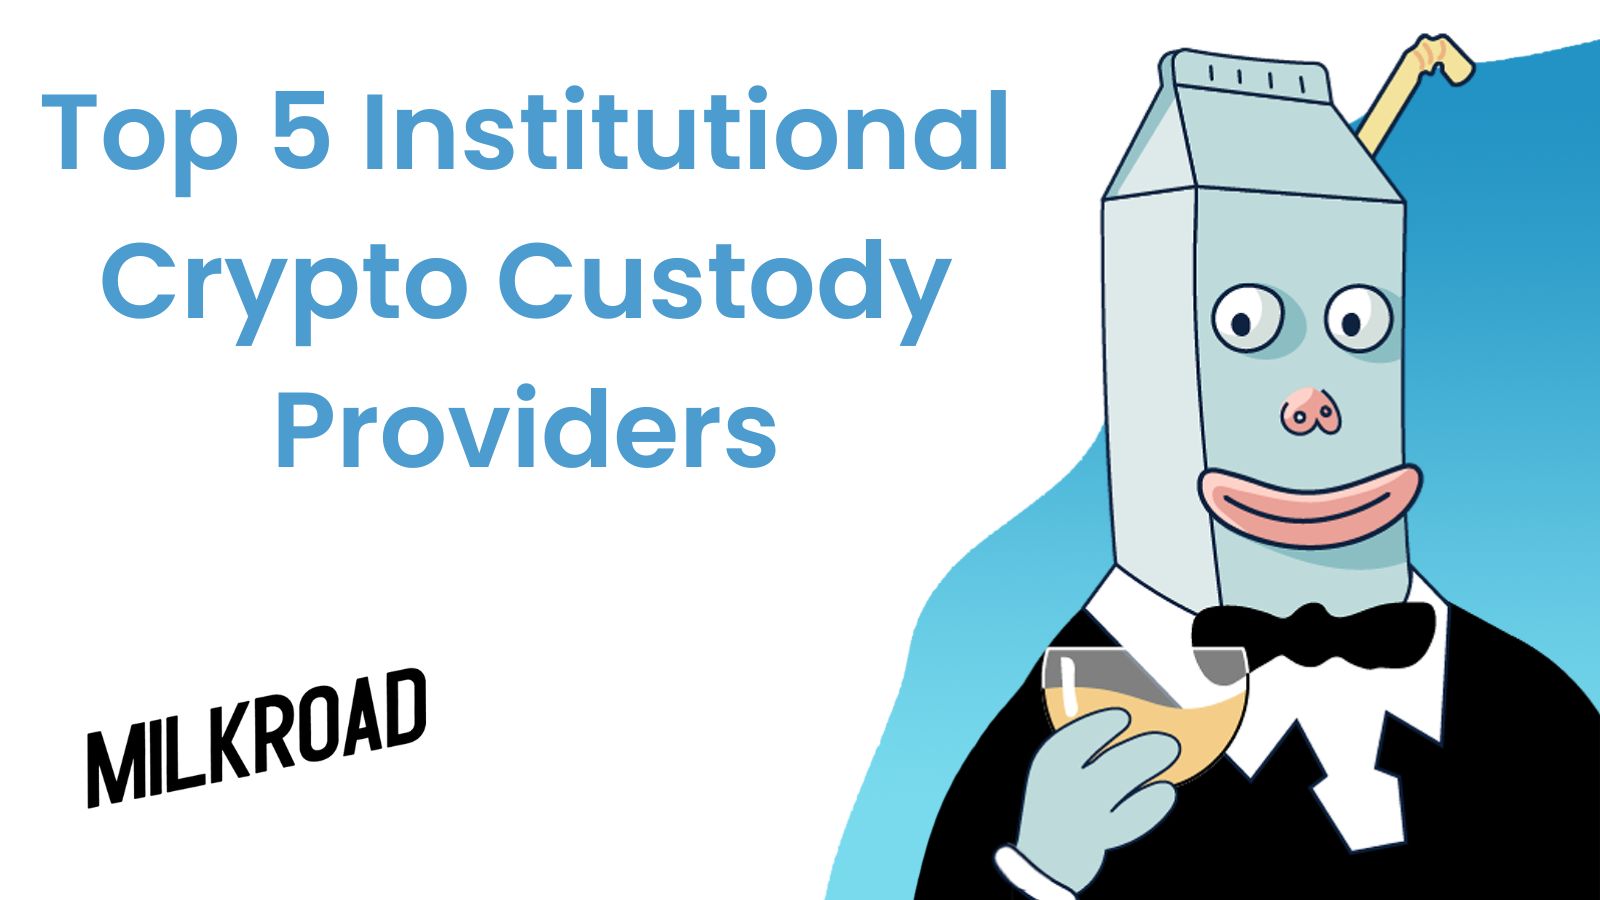 Top 5 Institutional Crypto Custody Providers For Securing Crypto